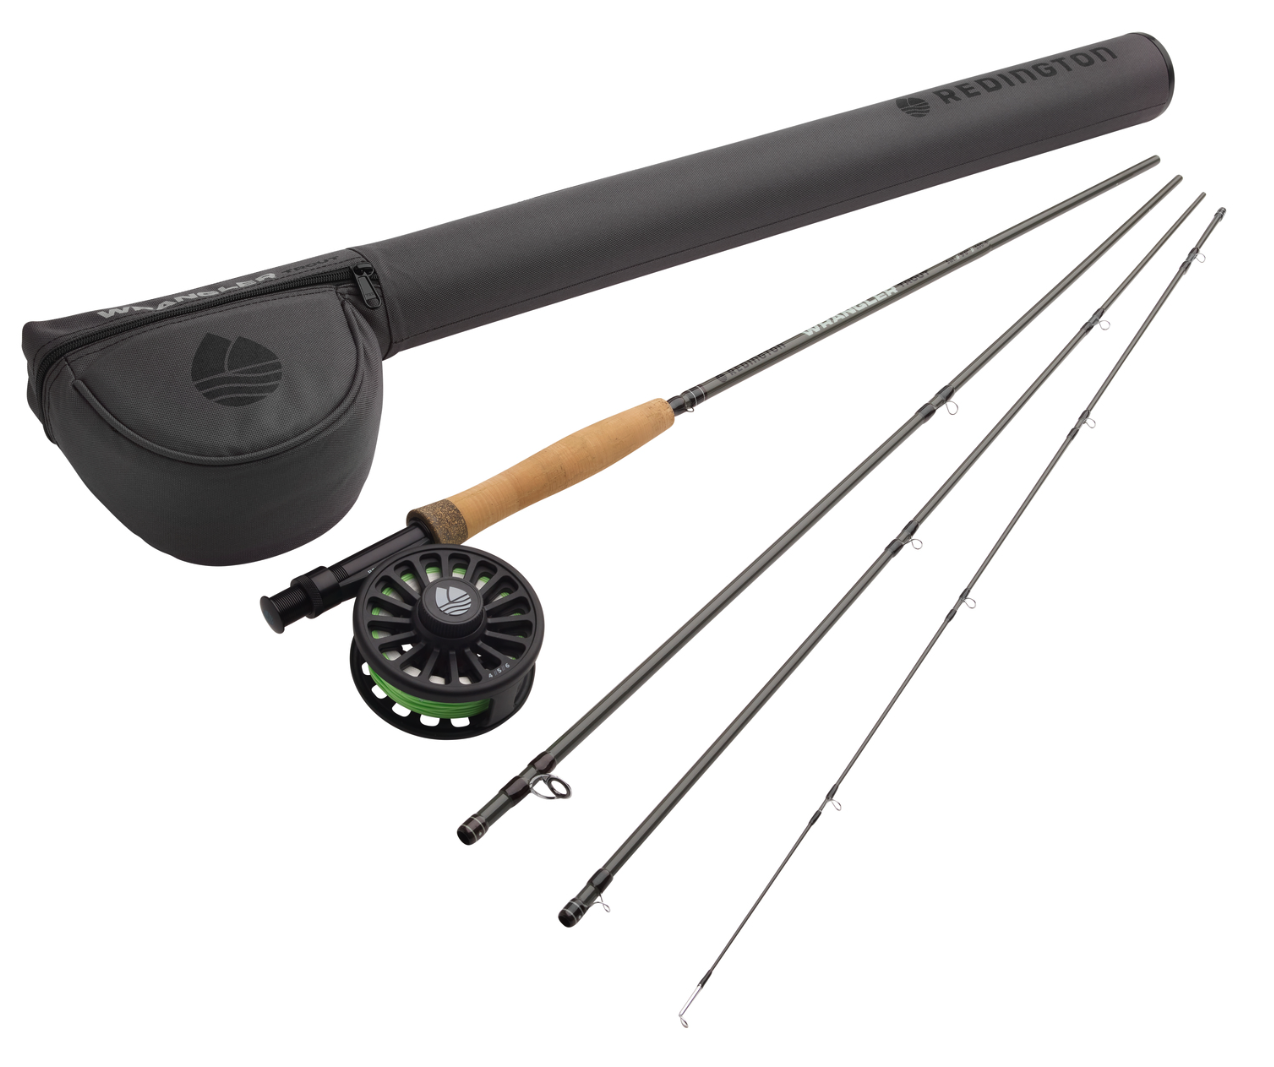 Redington Wrangler Trout Kit 590-4, Buy Trout Fly Fishing Kits, 5wt Fly  Rod Outfit, Best Trout Fly Rods Online